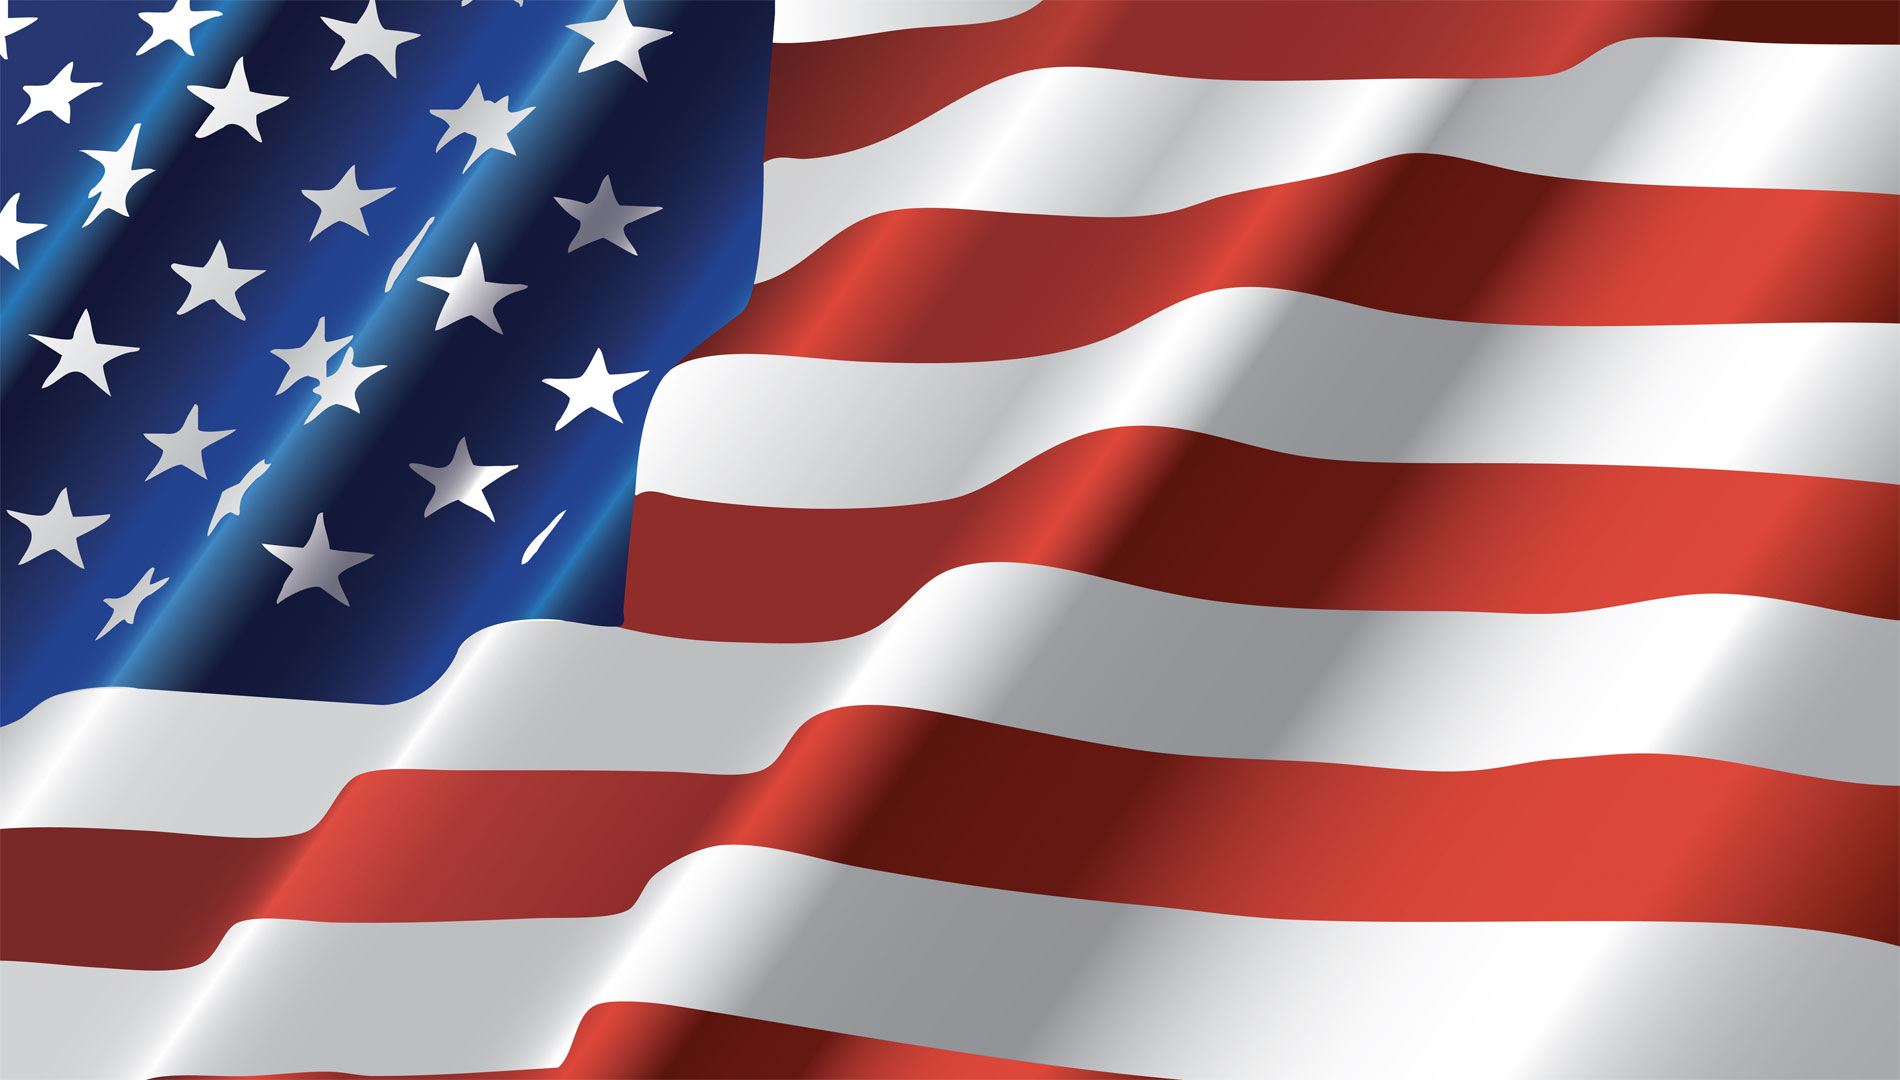 American Flag HD Image And Wallpaper